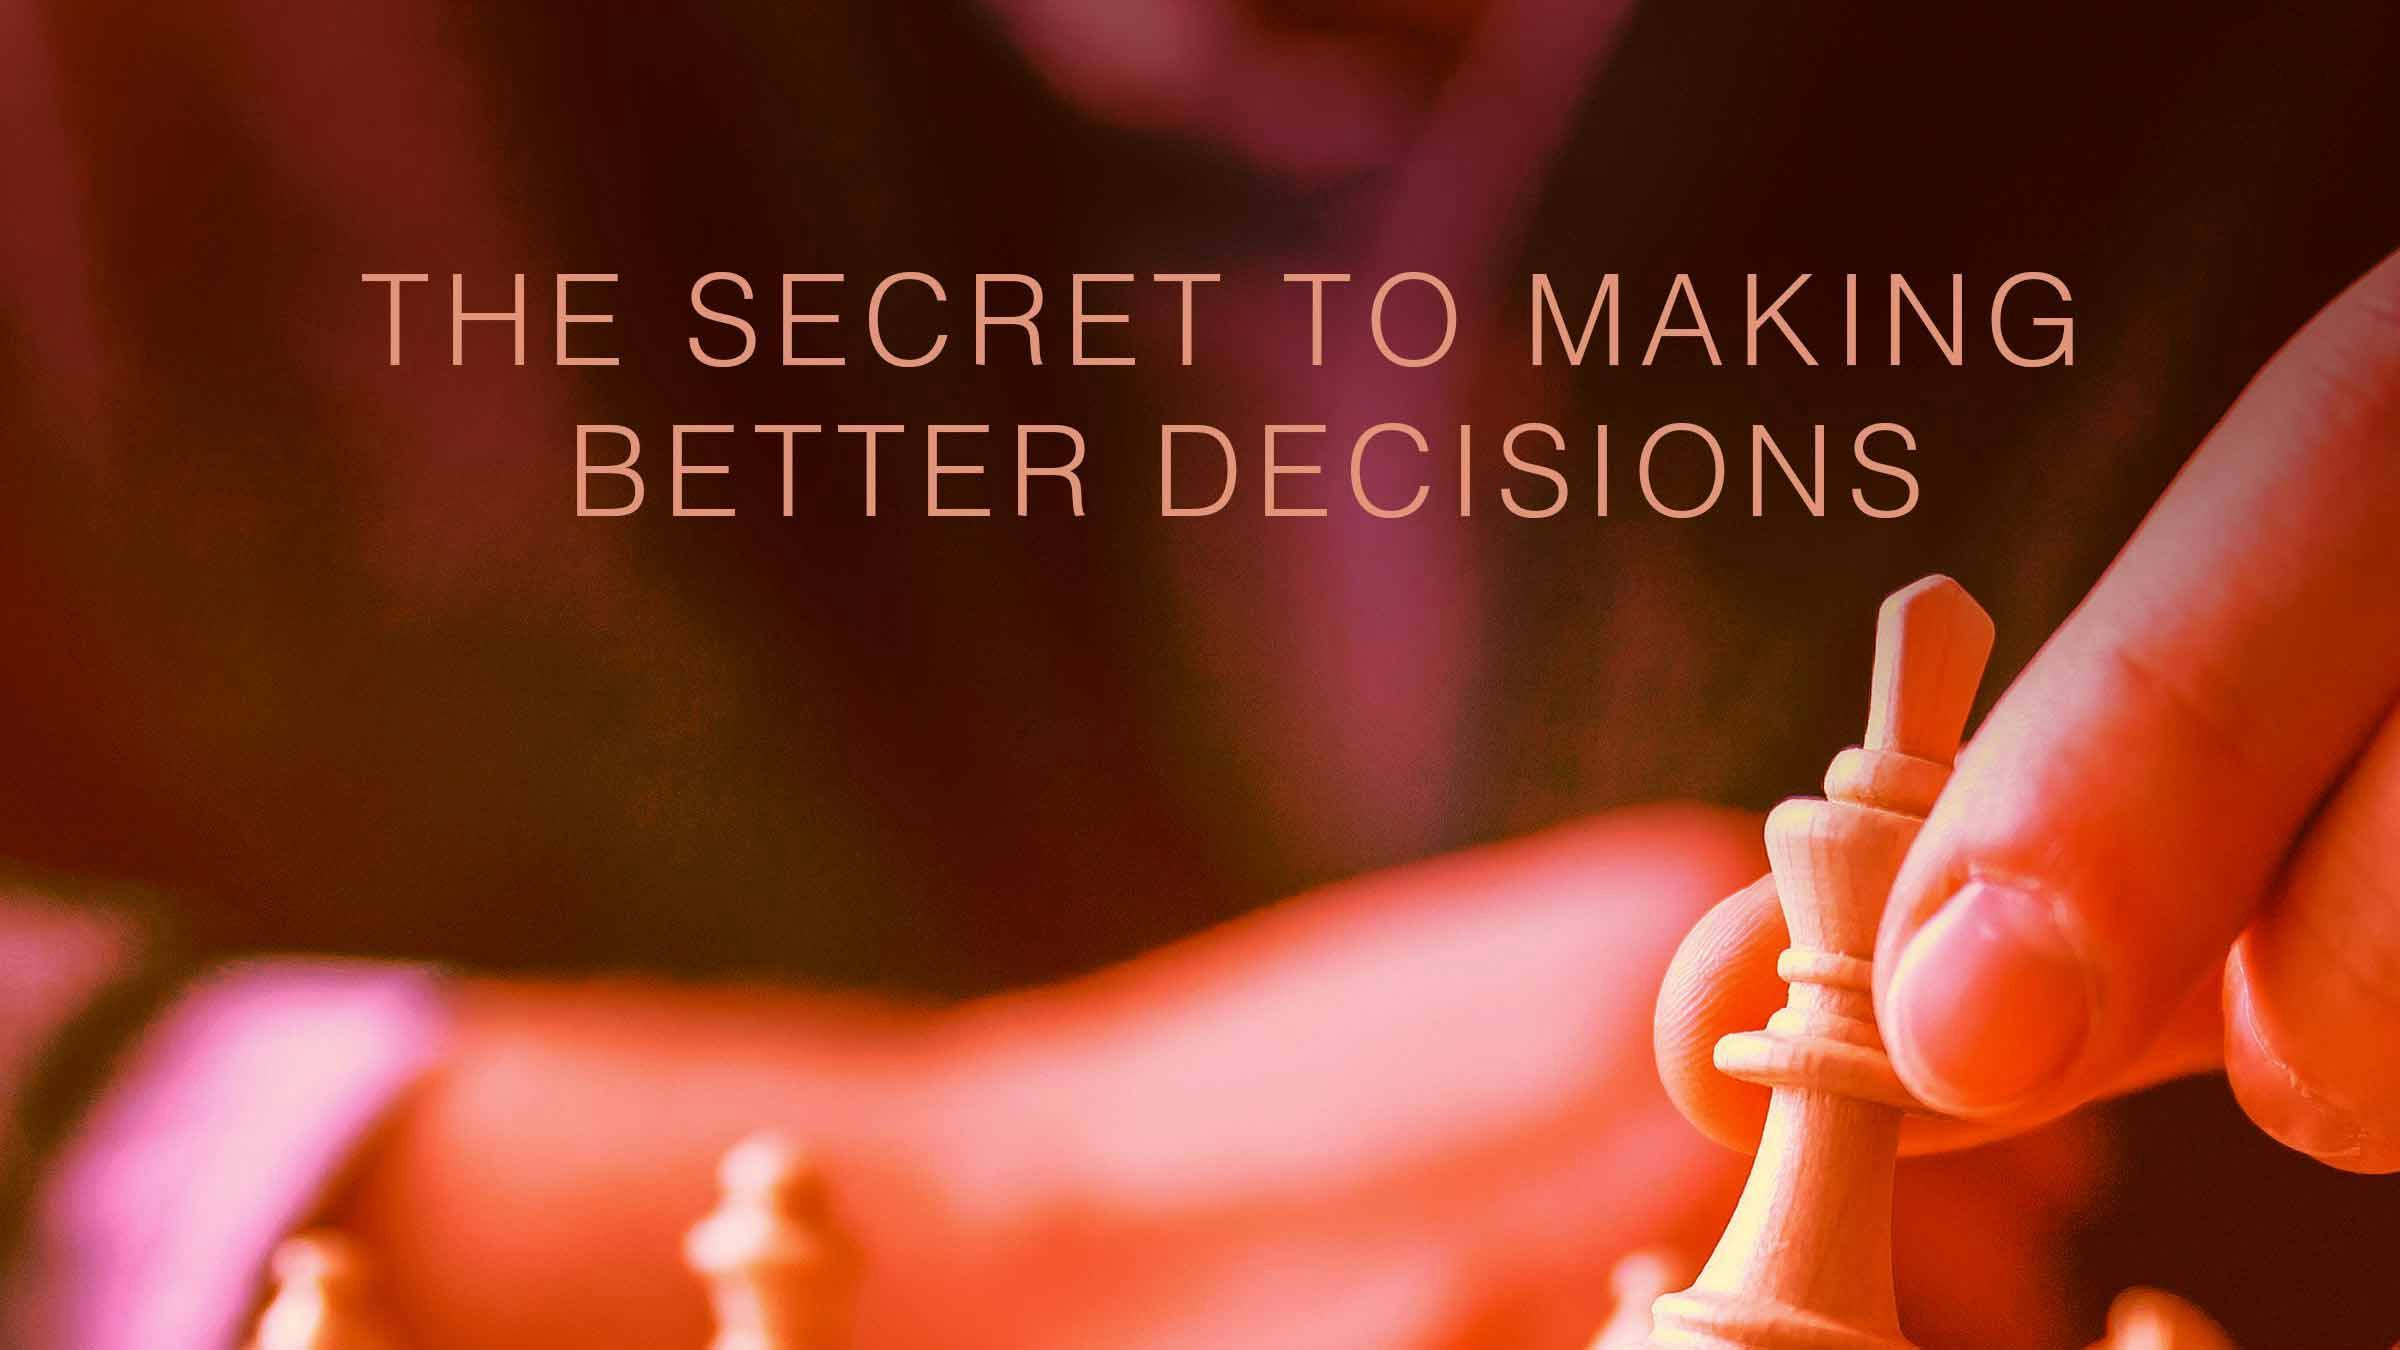 The Secret to Making Better Decisions